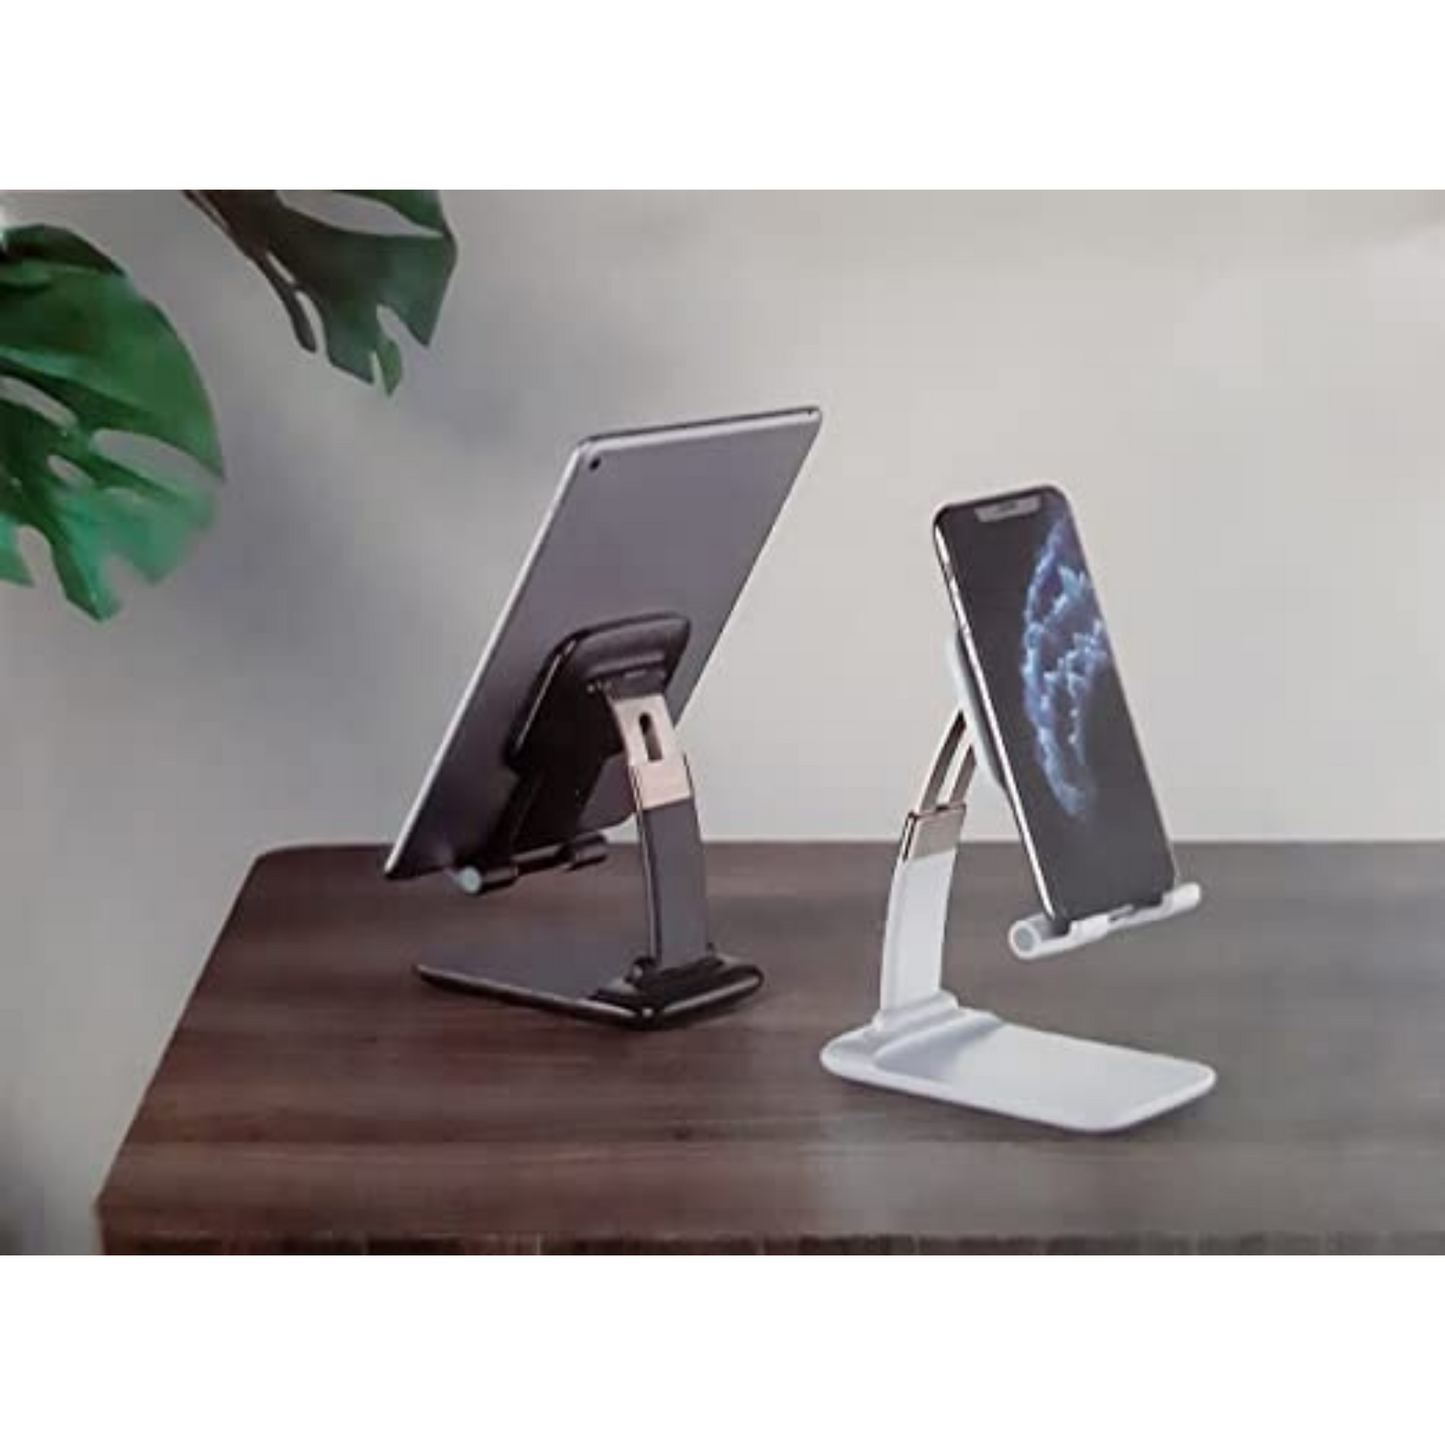 Adjustable Mobile Stand for Home & Office